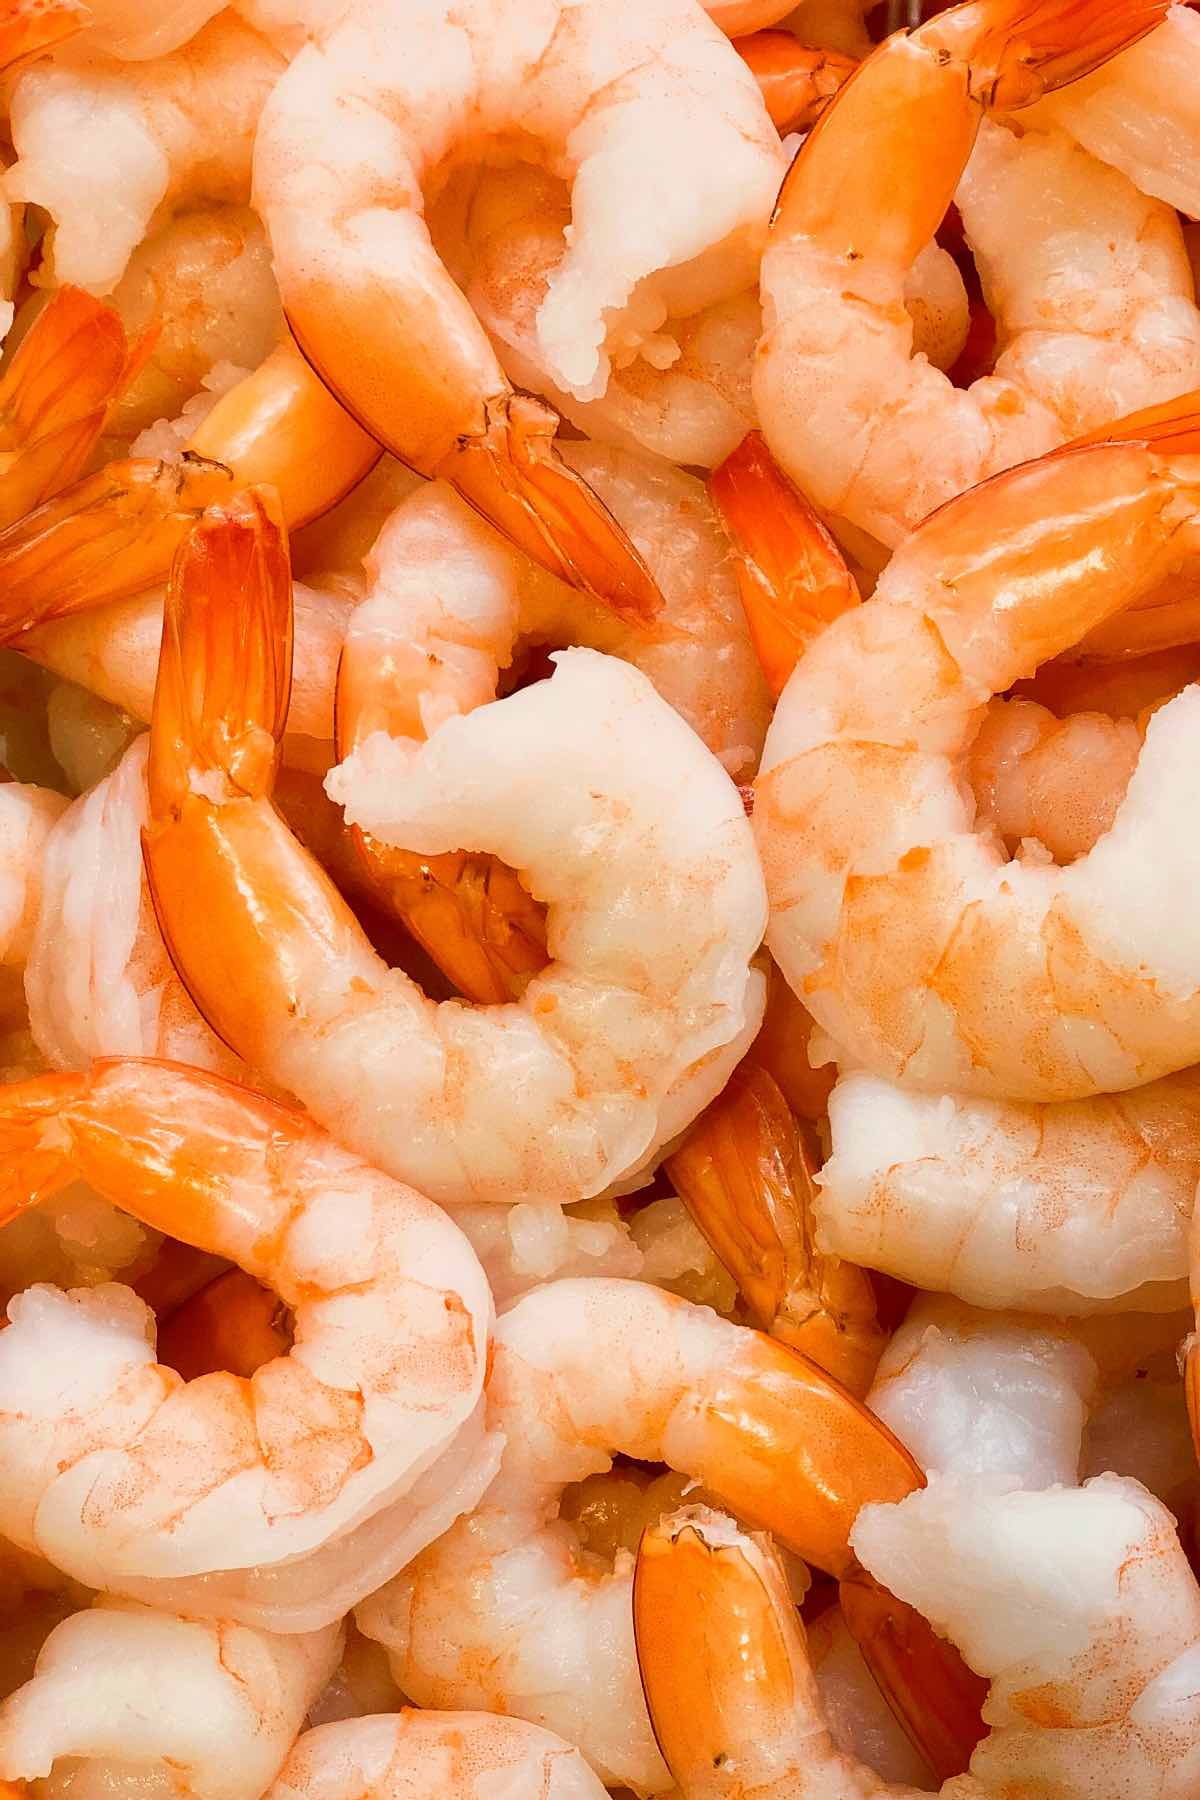 Cooked shrimp with tails on